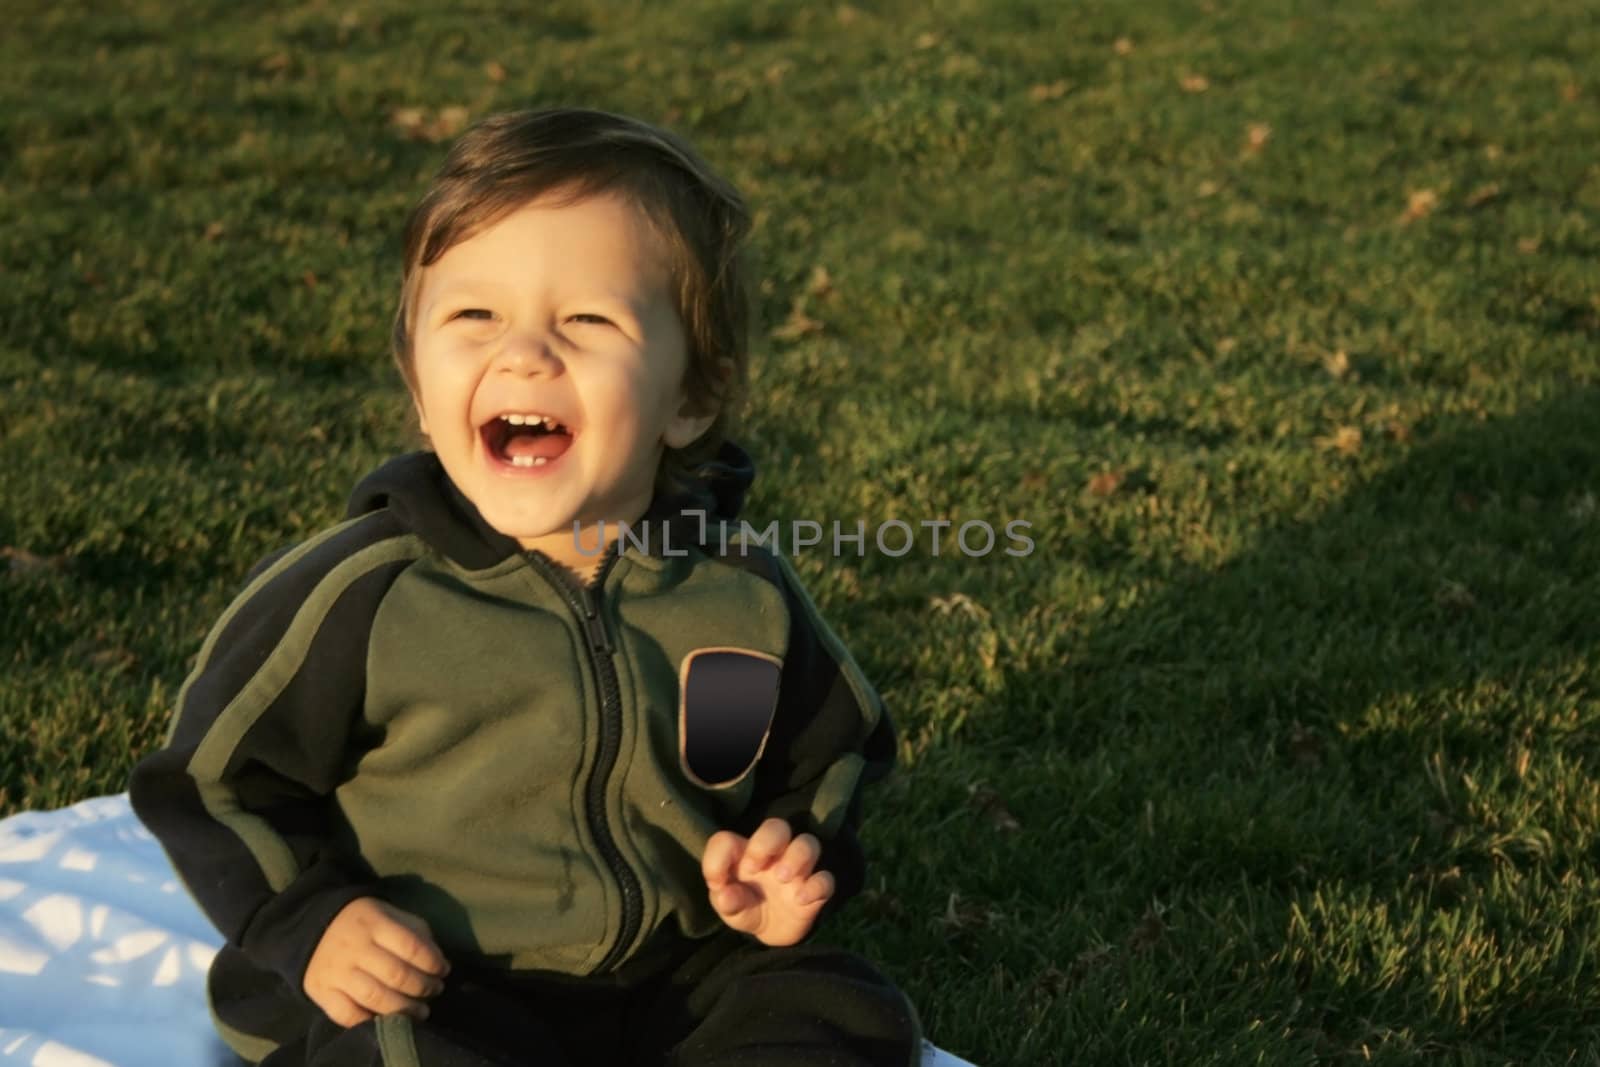 Little Baby boy playing in the park